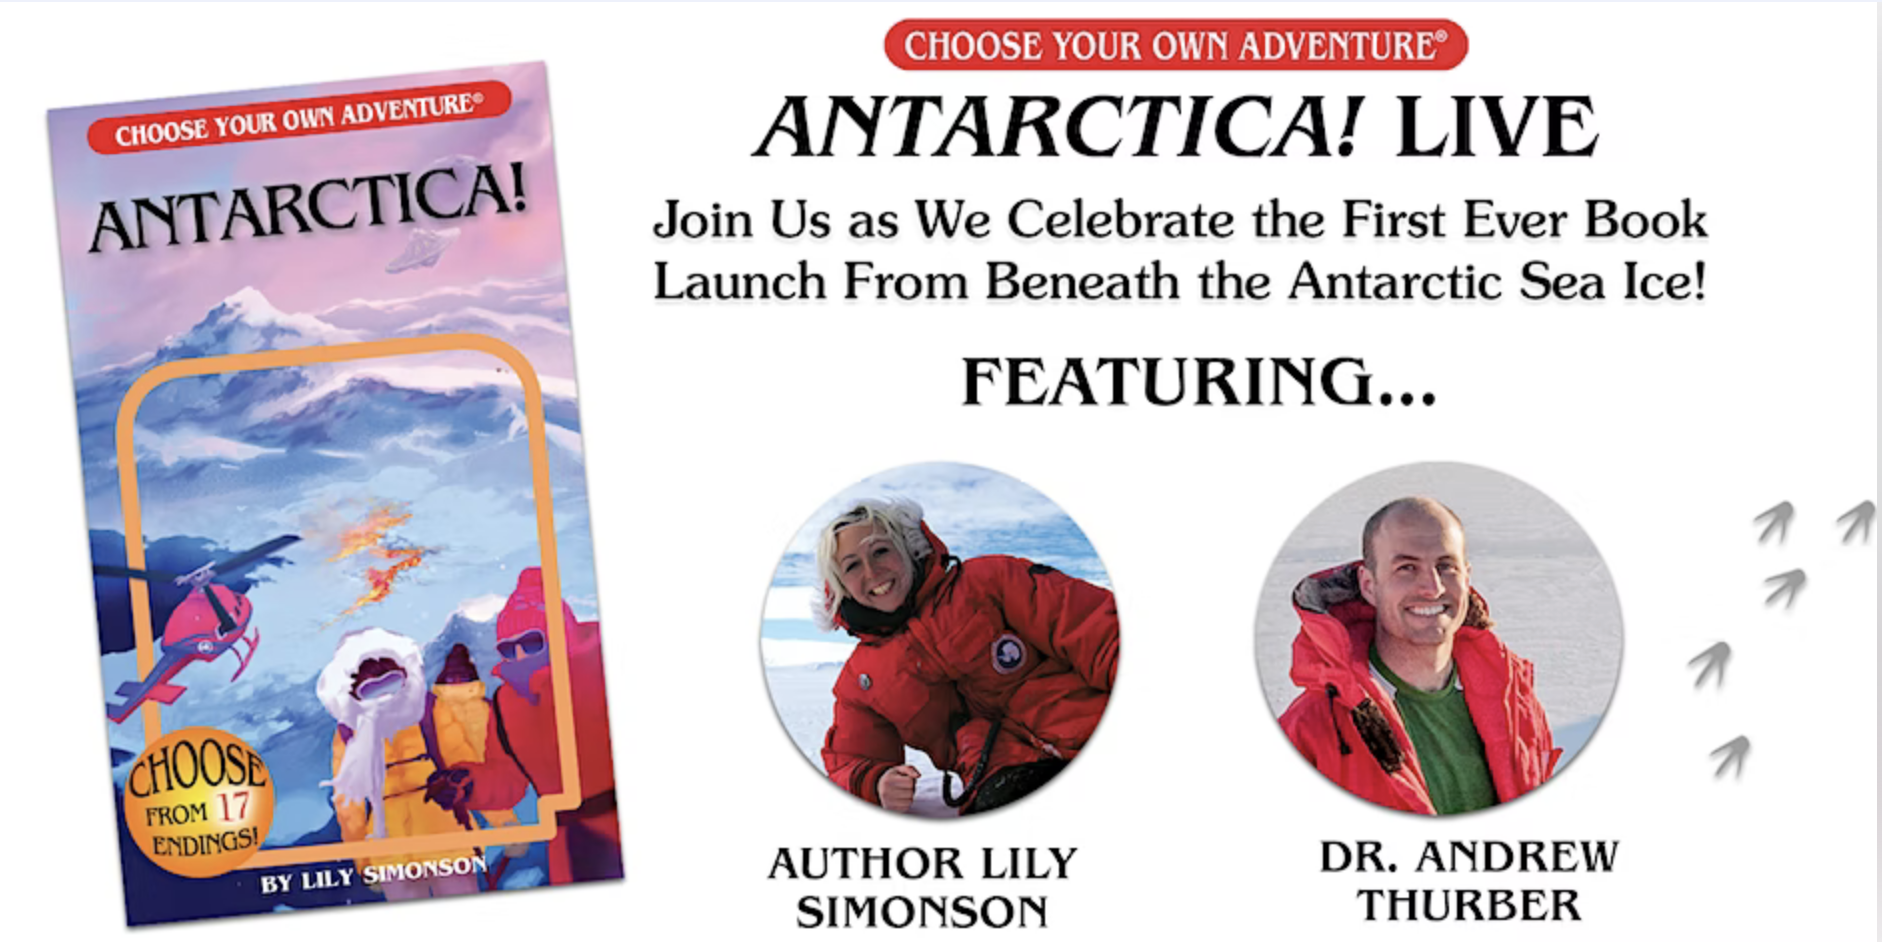 Image announcing the Antarctica Live event and book launch on 18 October 2022.